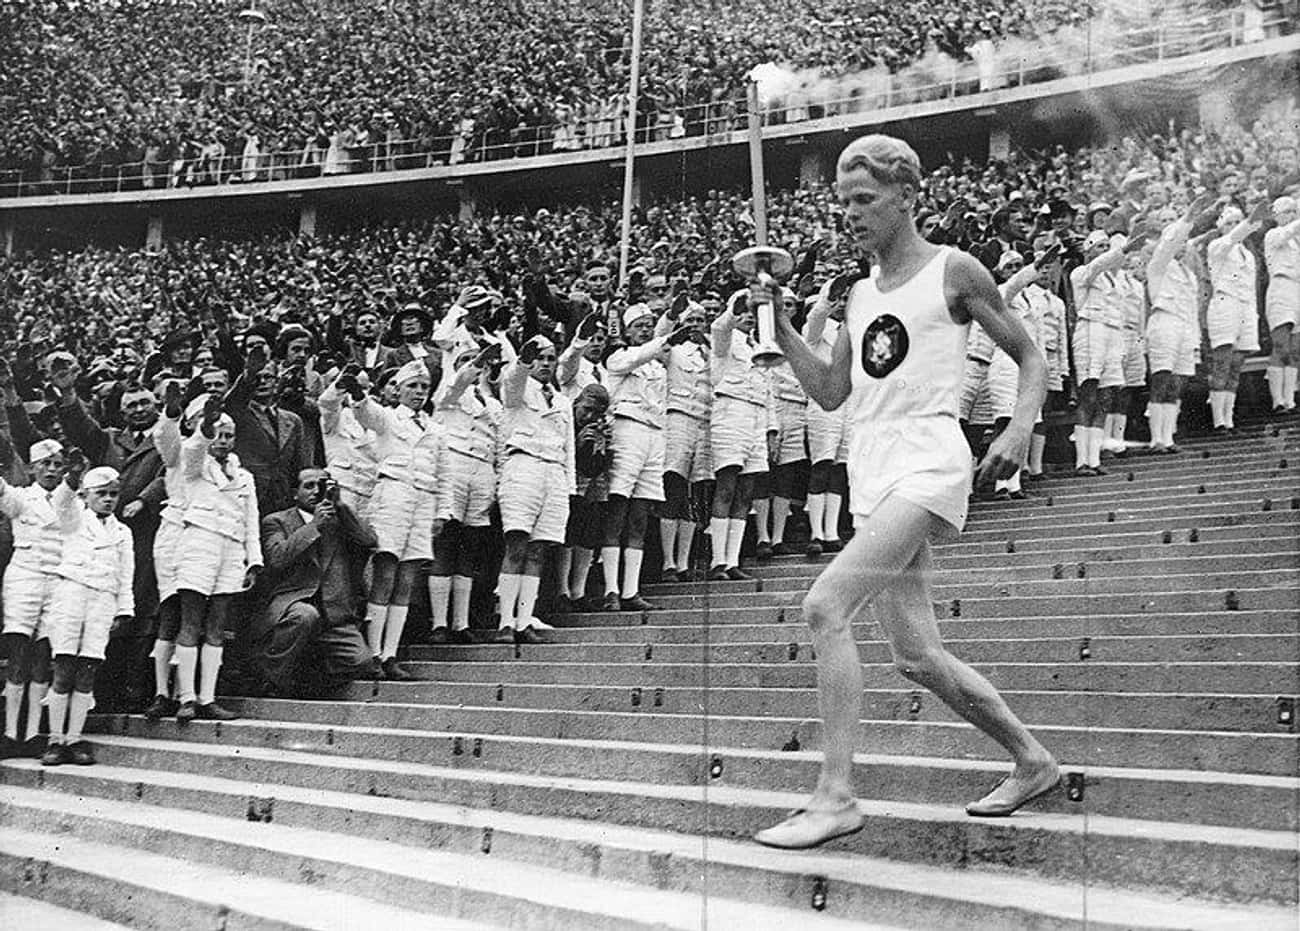 1936 Summer Olympics - The Third Reich Takes Sportswashing To Olympian Levels 